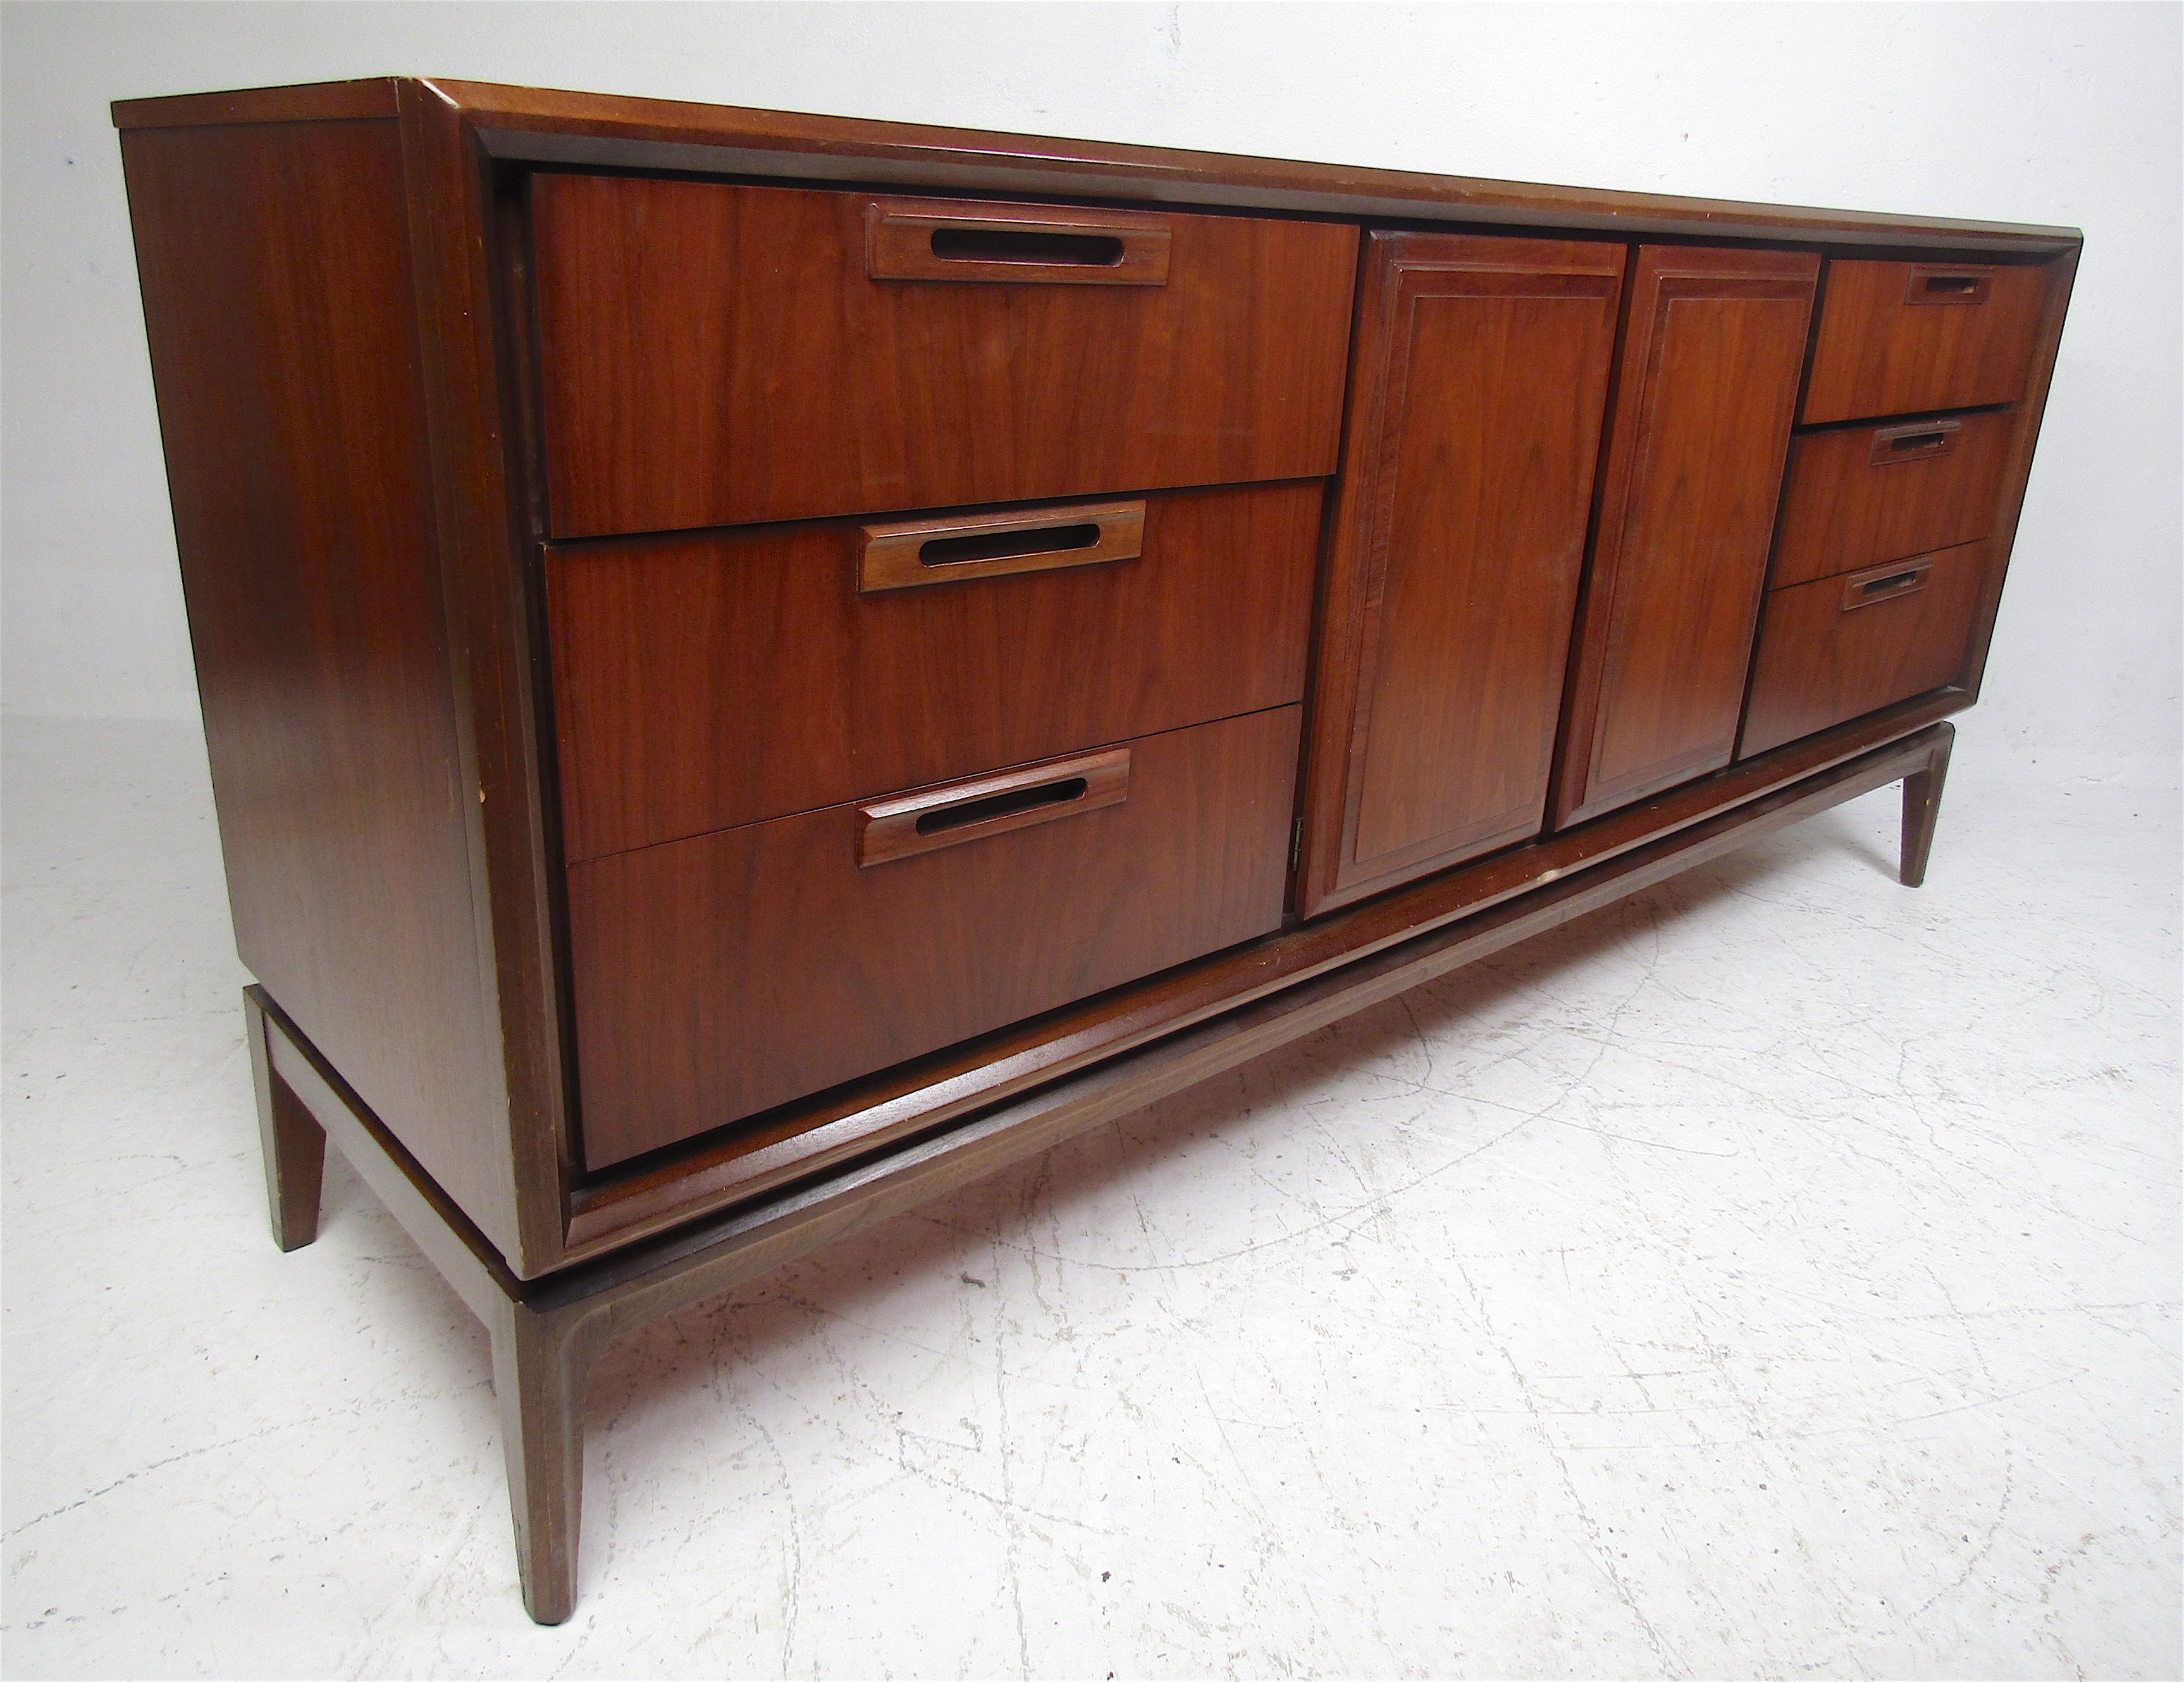 This beautiful vintage modern bedroom set includes two nightstands, a highboy dresser, a lowboy dresser, and a queen size headboard. Sleek design with recessed drawer pulls, dovetailed drawers, and ample storage space. The headboard features a